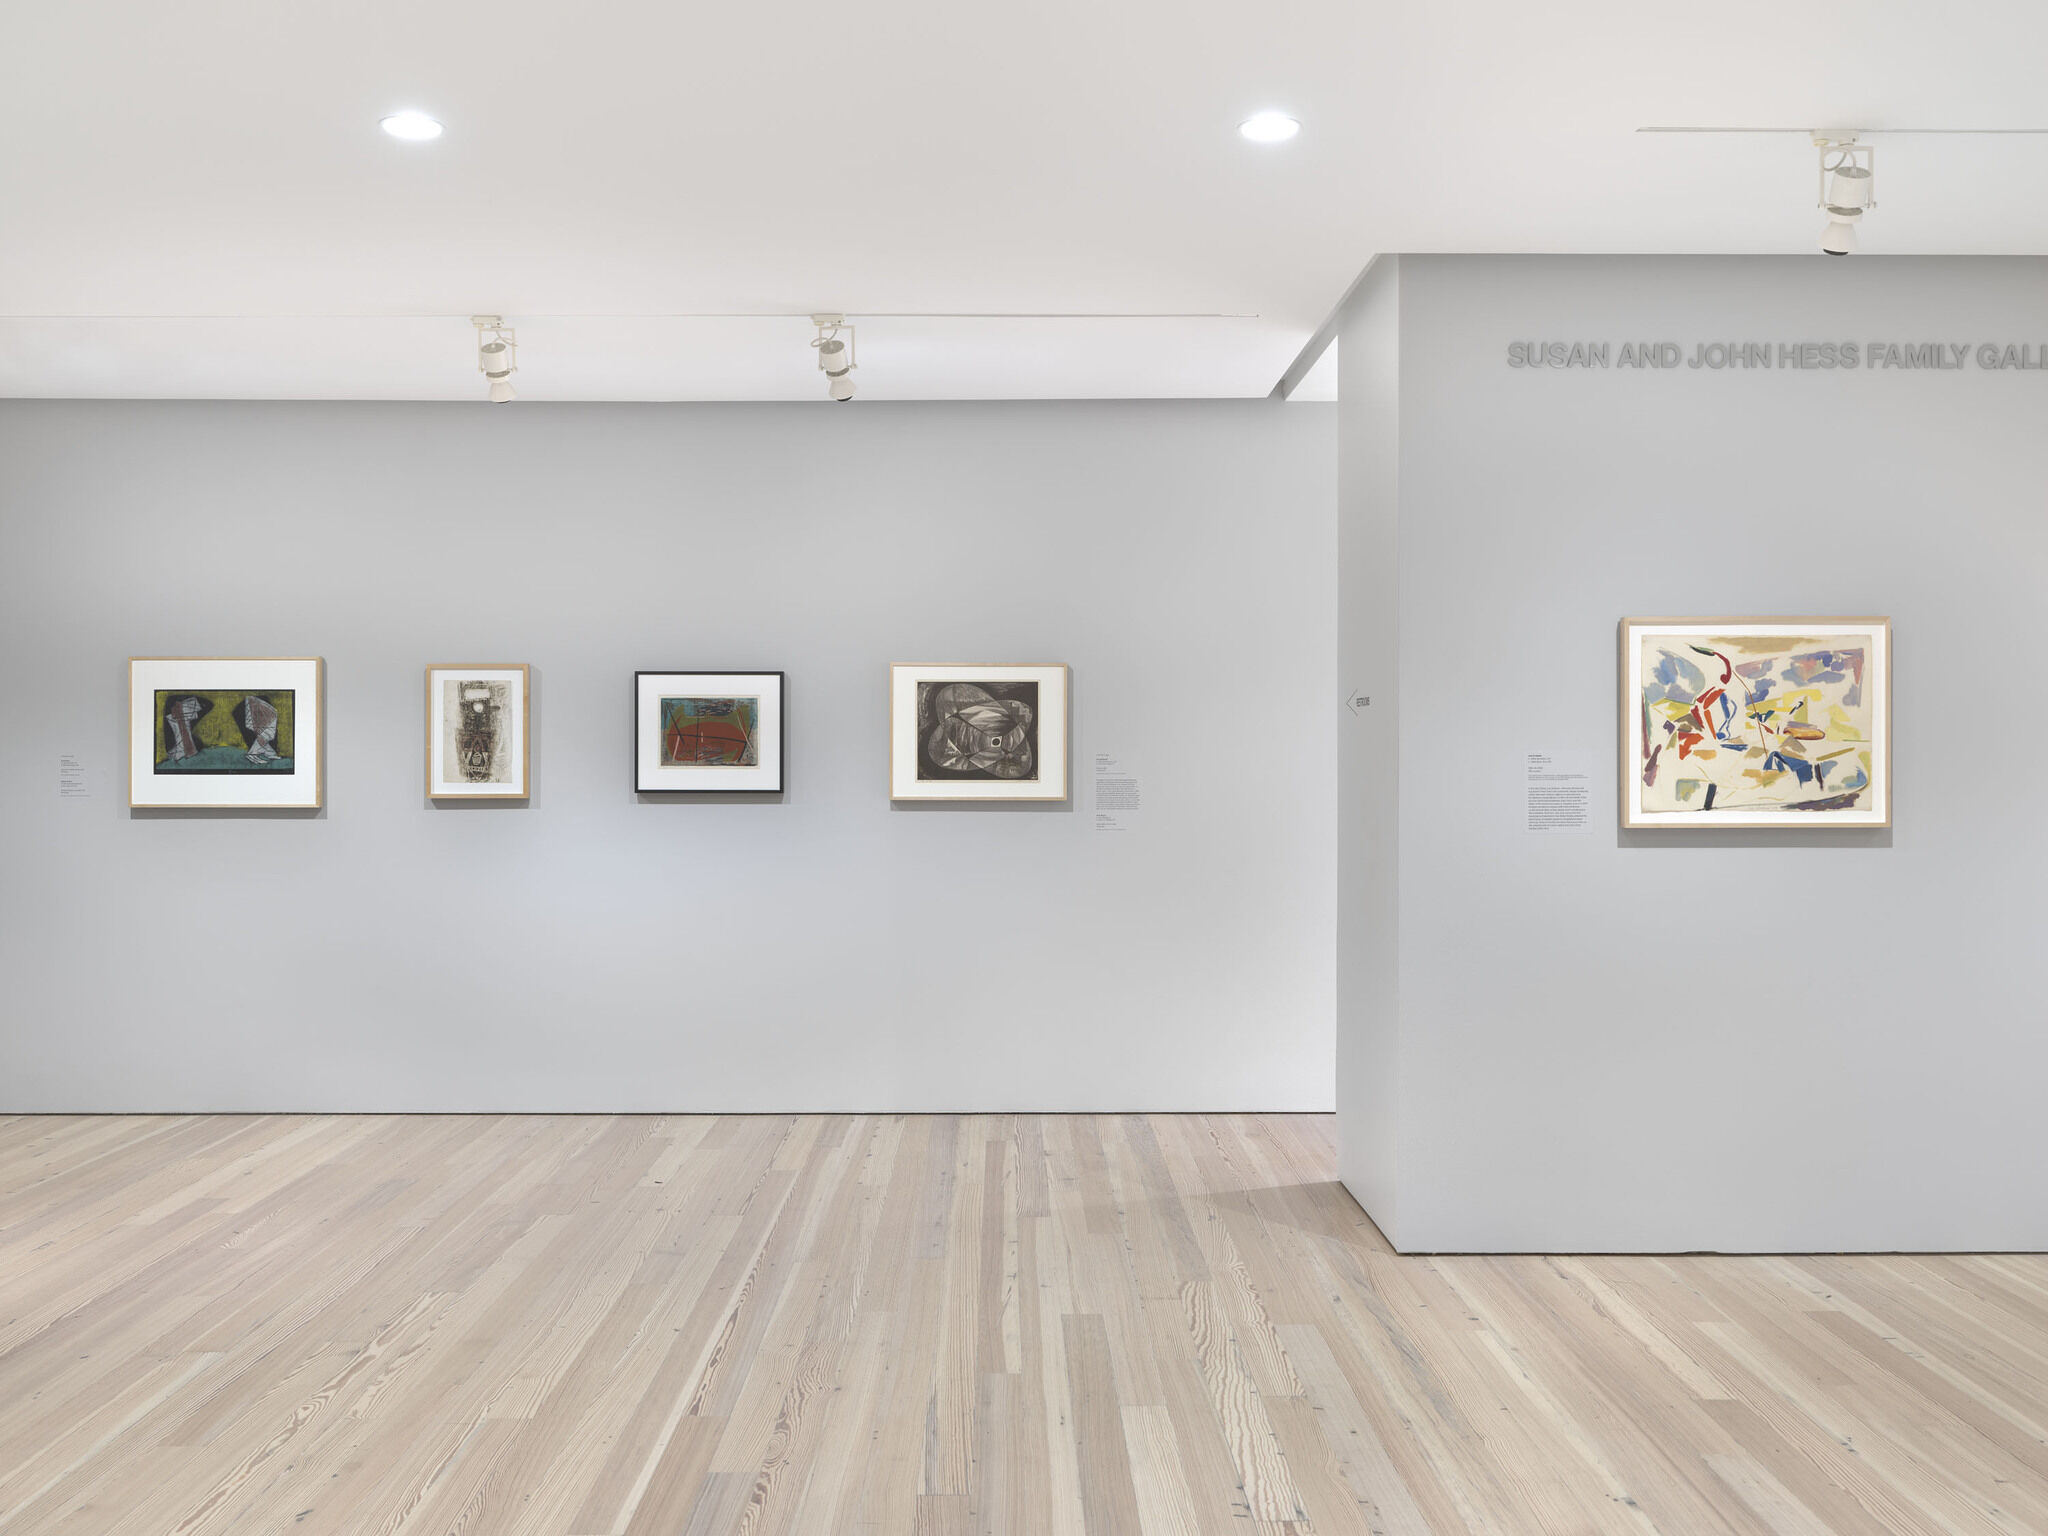 Five framed pieces mounted across two neighboring exhibition walls.